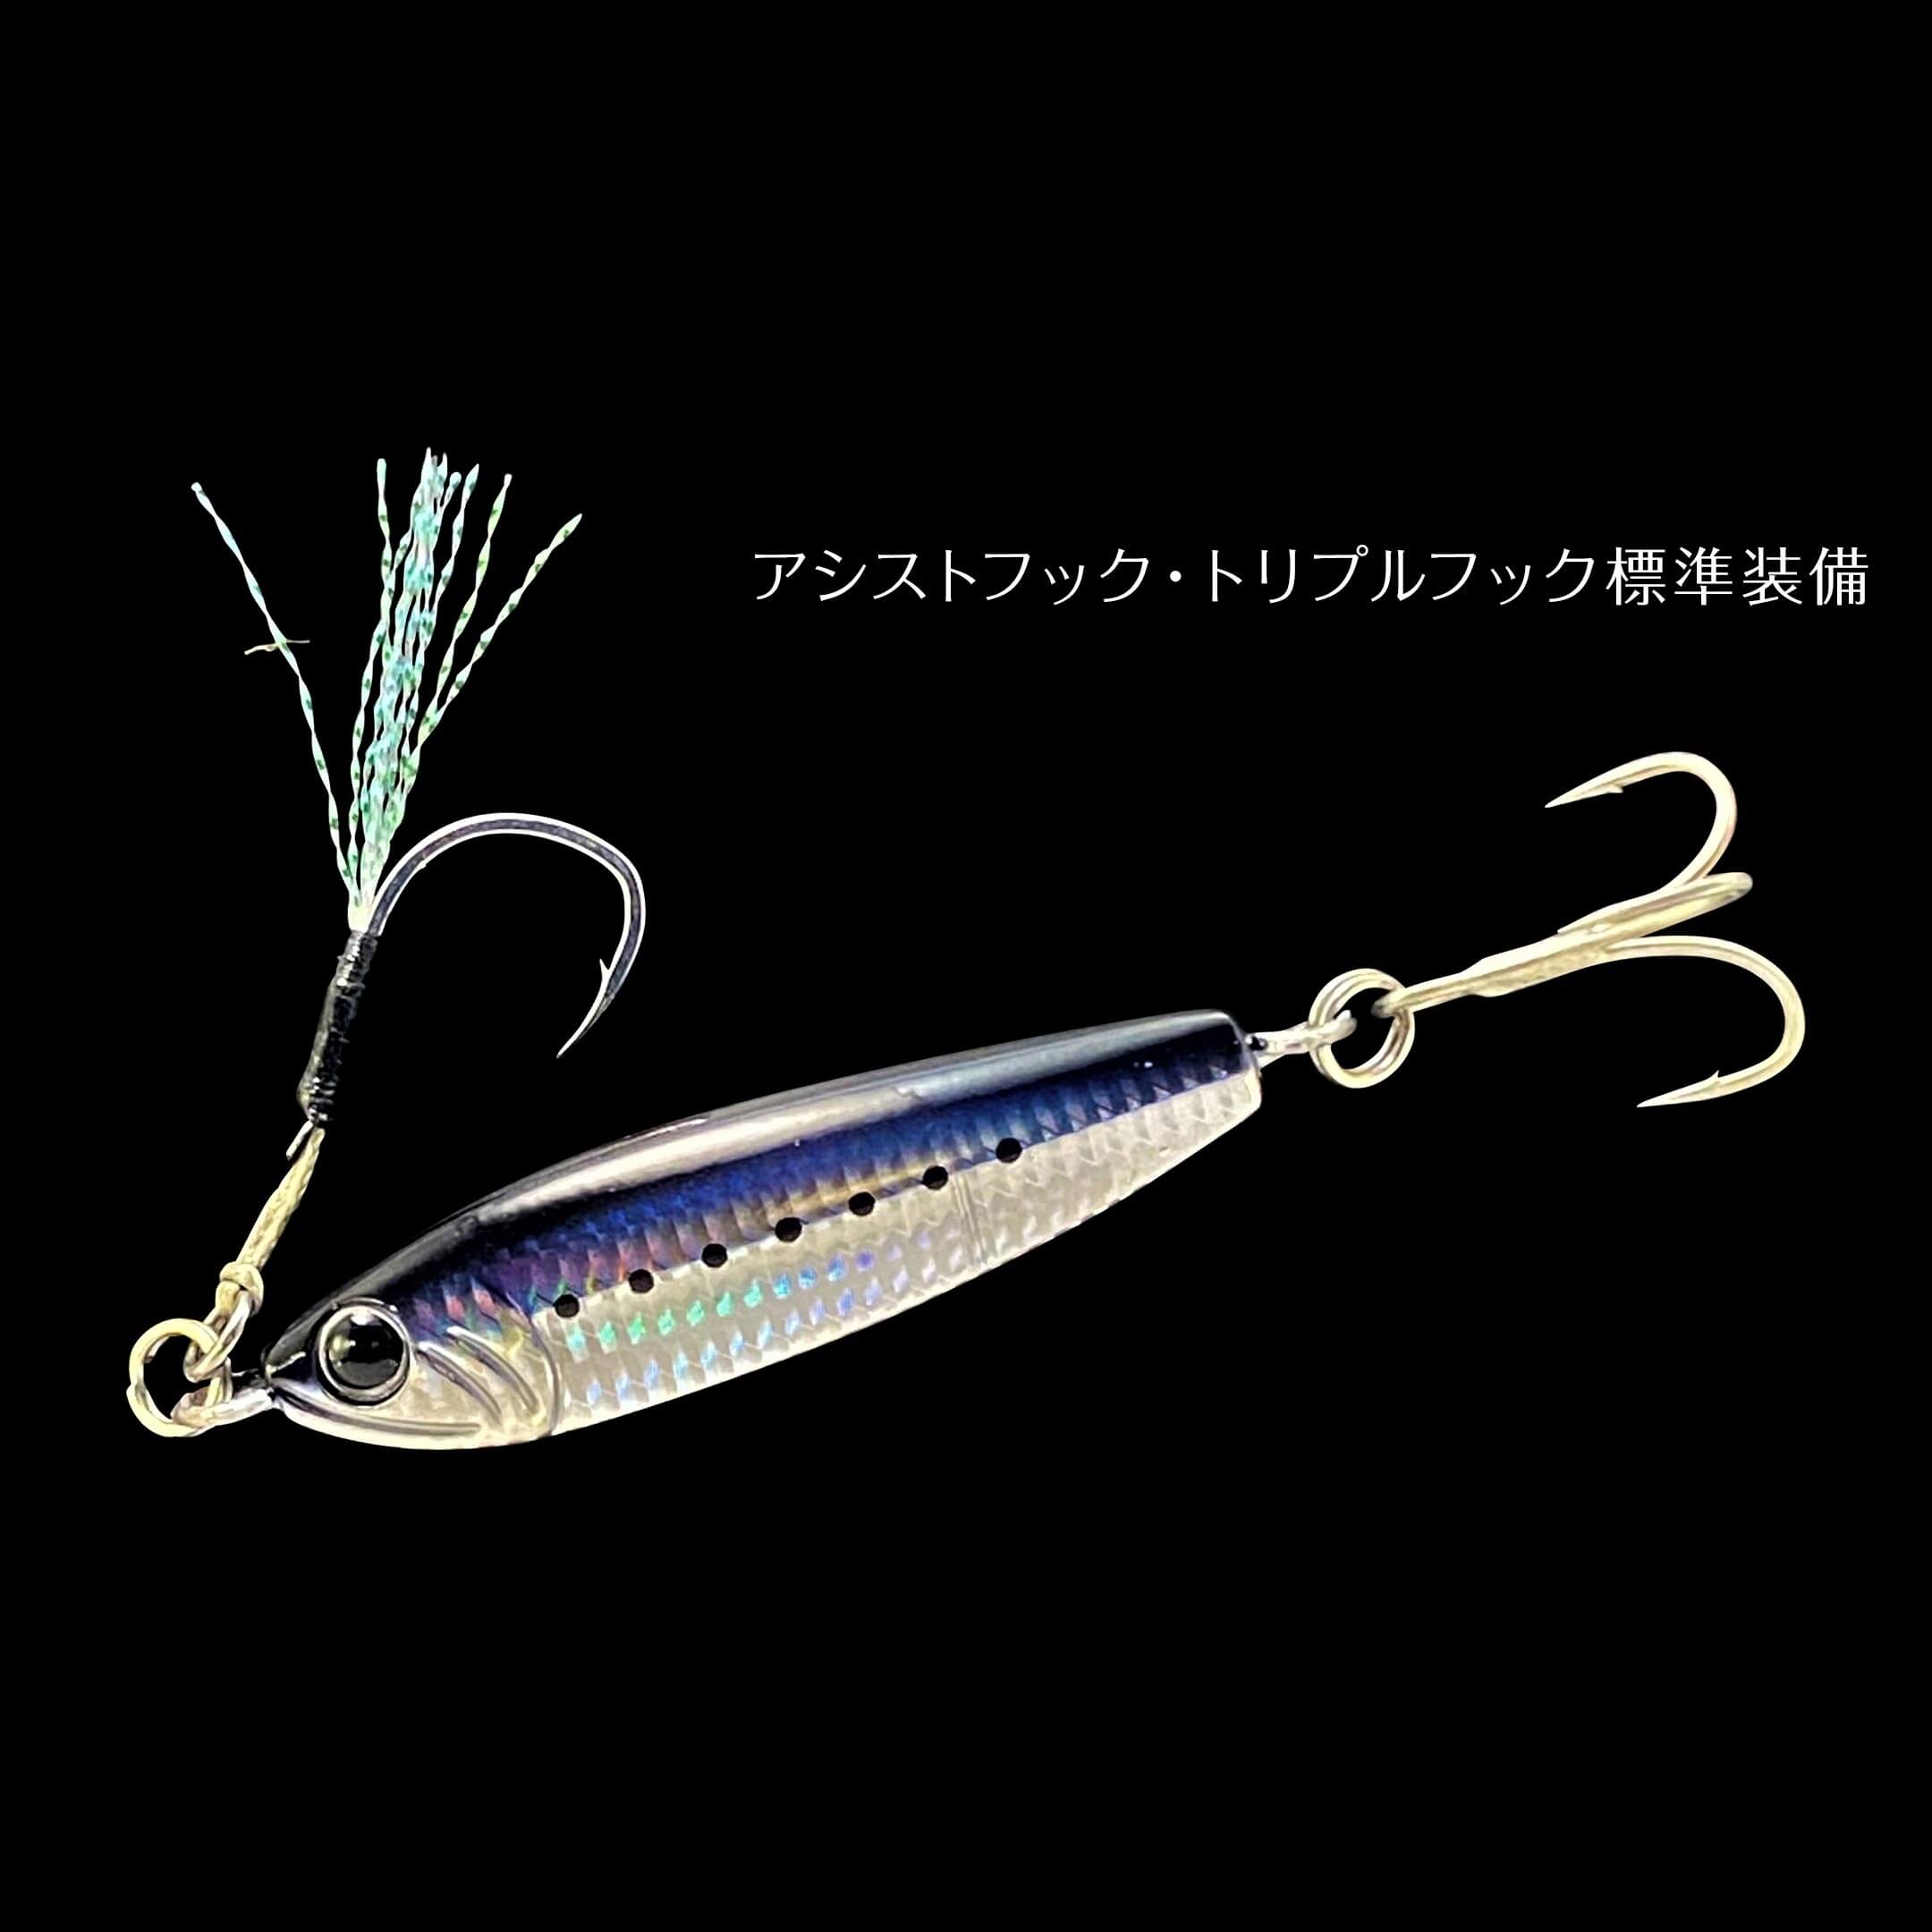 Metal Jig (10g - 60g) Archives - Japan Fishing and Tackle News